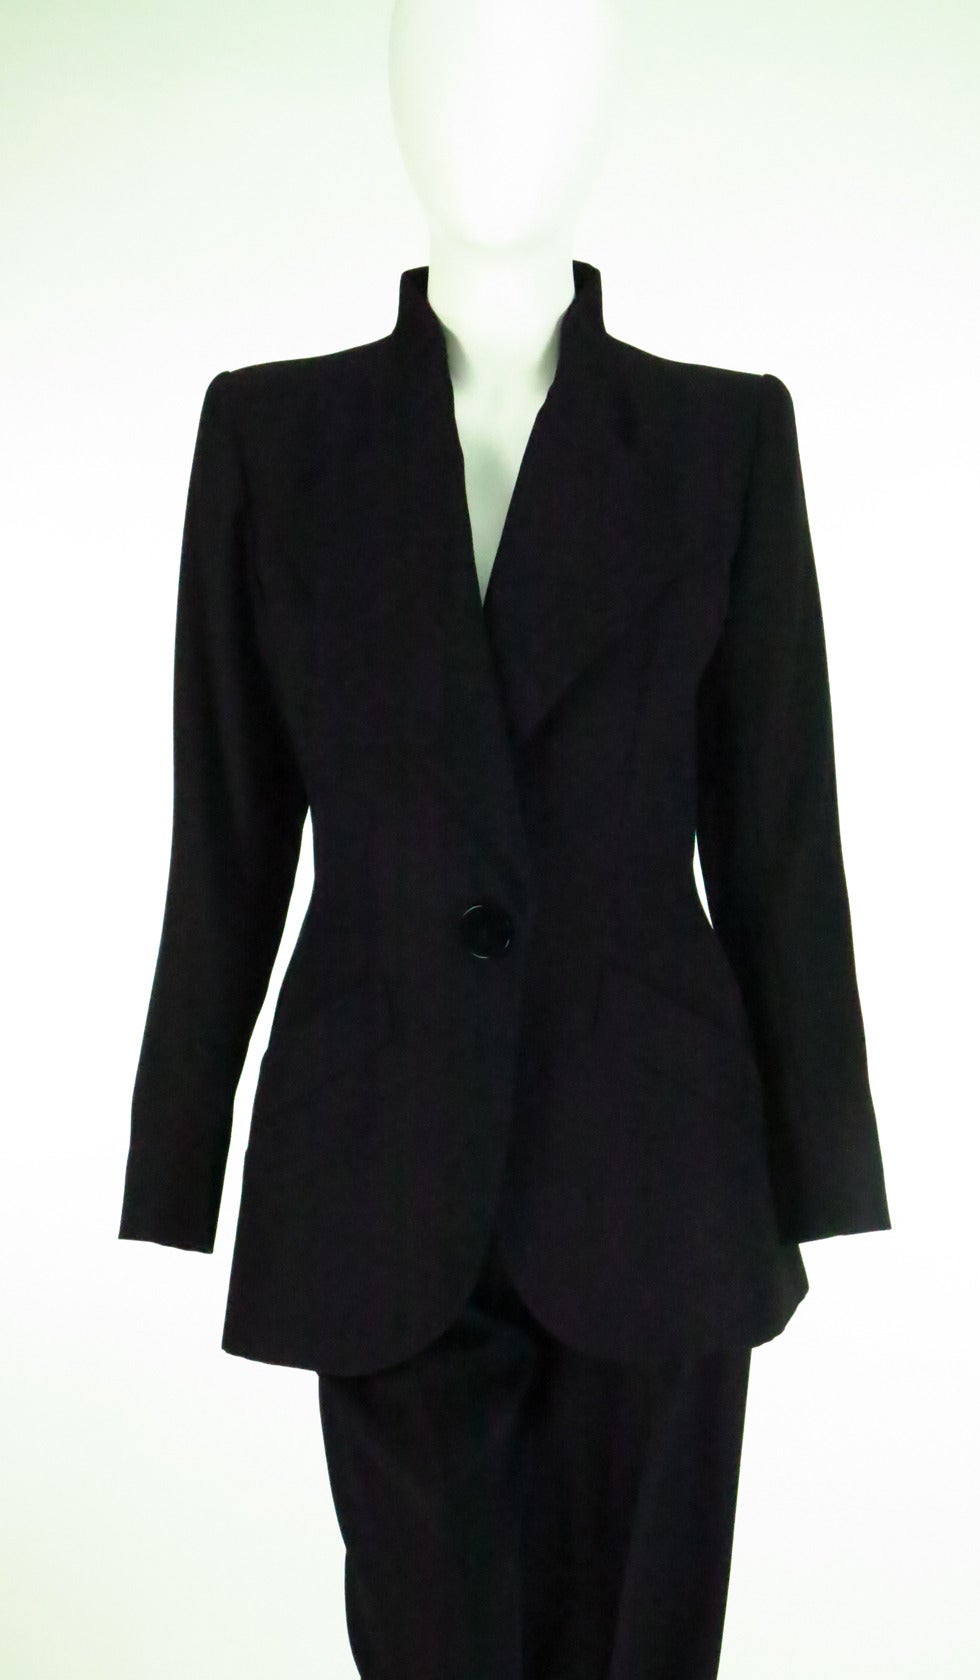 Yves St Laurent black wool twill, nipped waist jacket high waist Trouser...Marked size 36...The trouser is unworn/NWT...The jacket shape is long and fitted giving the body a feminine curve, looks wonderful with a short skirt...Jacket closes at the